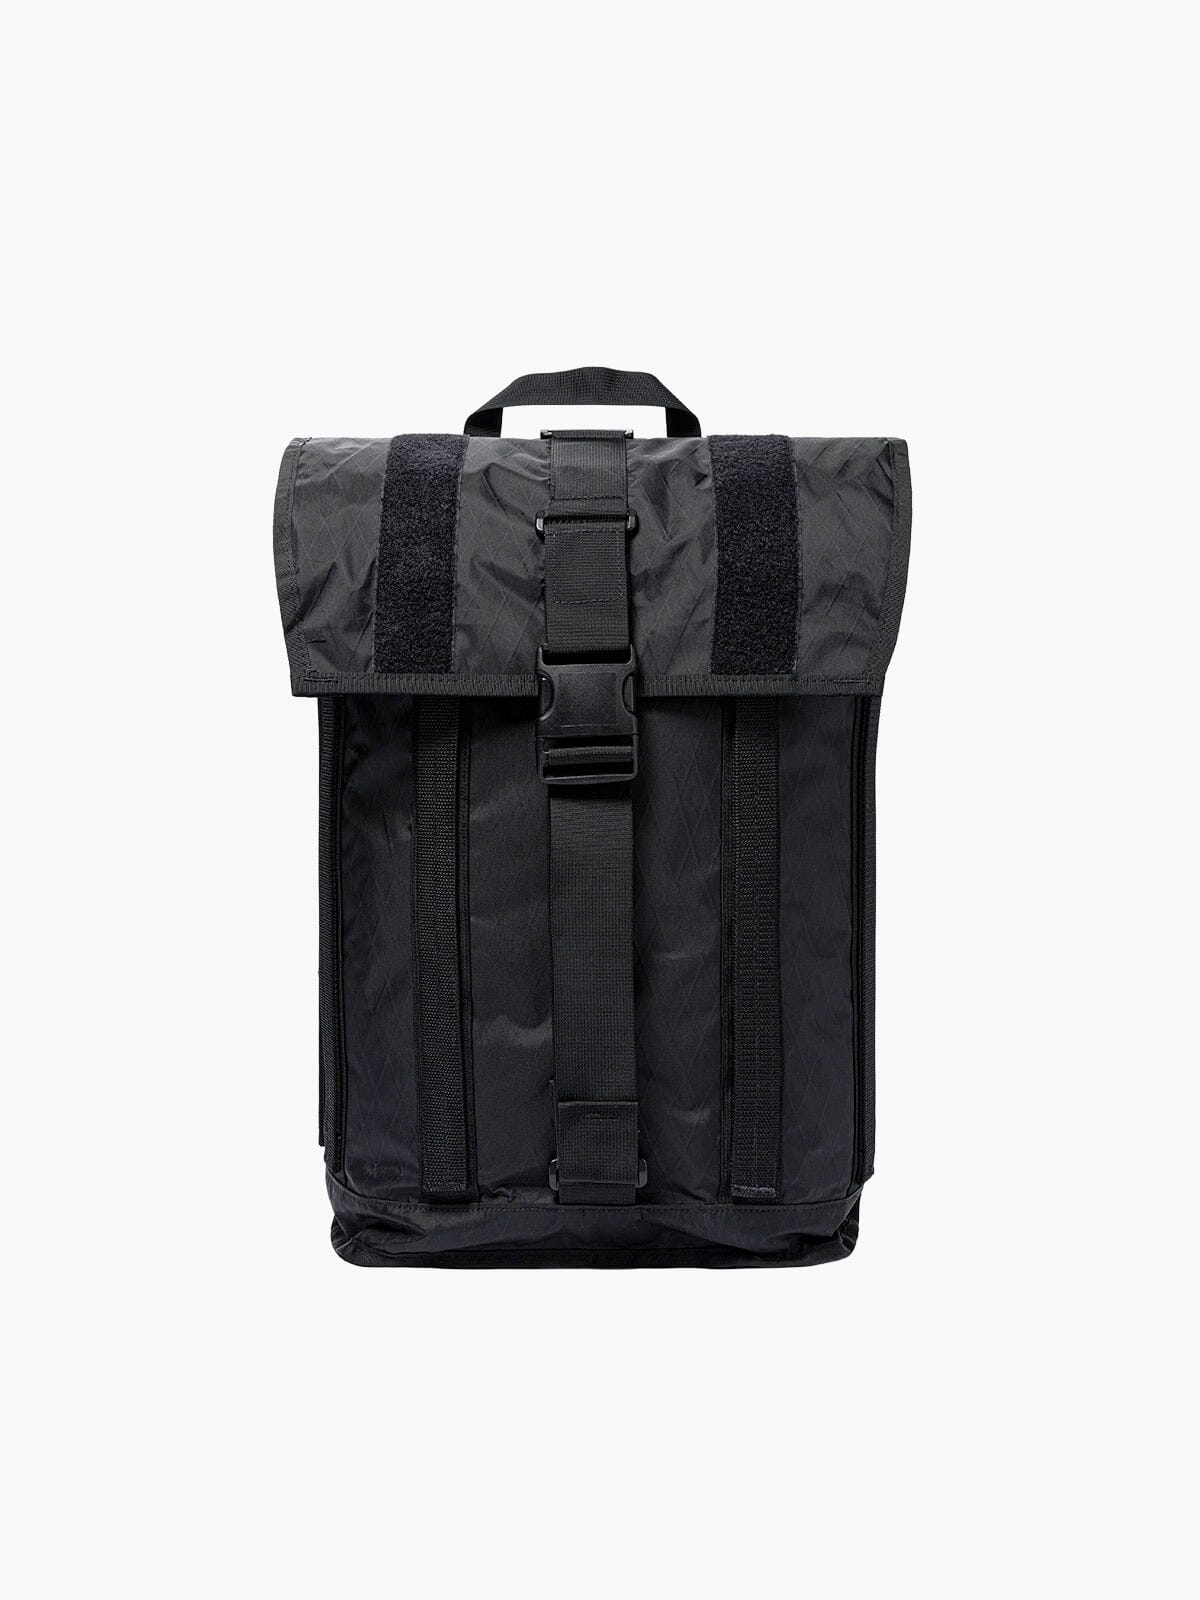 R6 Arkiv Field Pack 40L by Mission Workshop - Weatherproof Bags & Technical Apparel - San Francisco & Los Angeles - Built to endure - Guaranteed forever